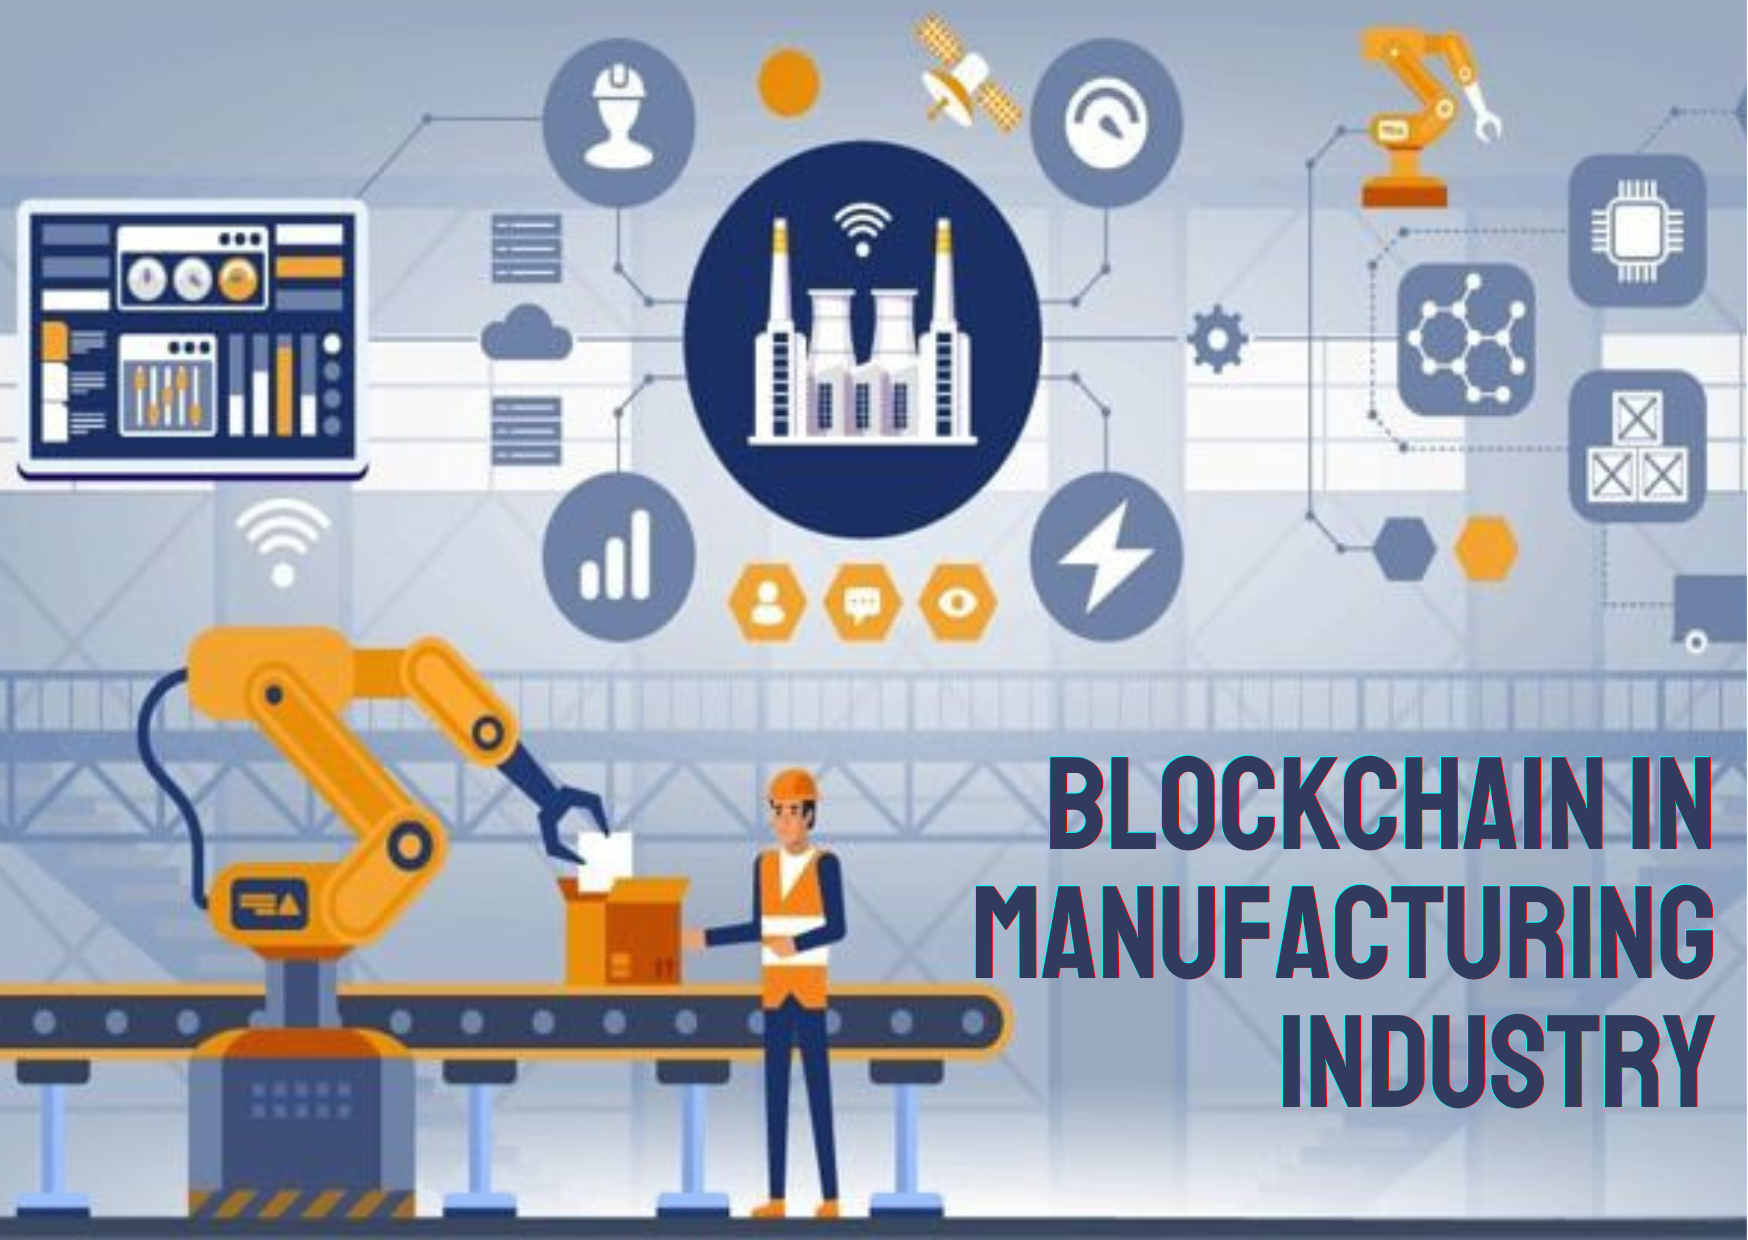 Blockchain and NFTs in Manufacturing Industry